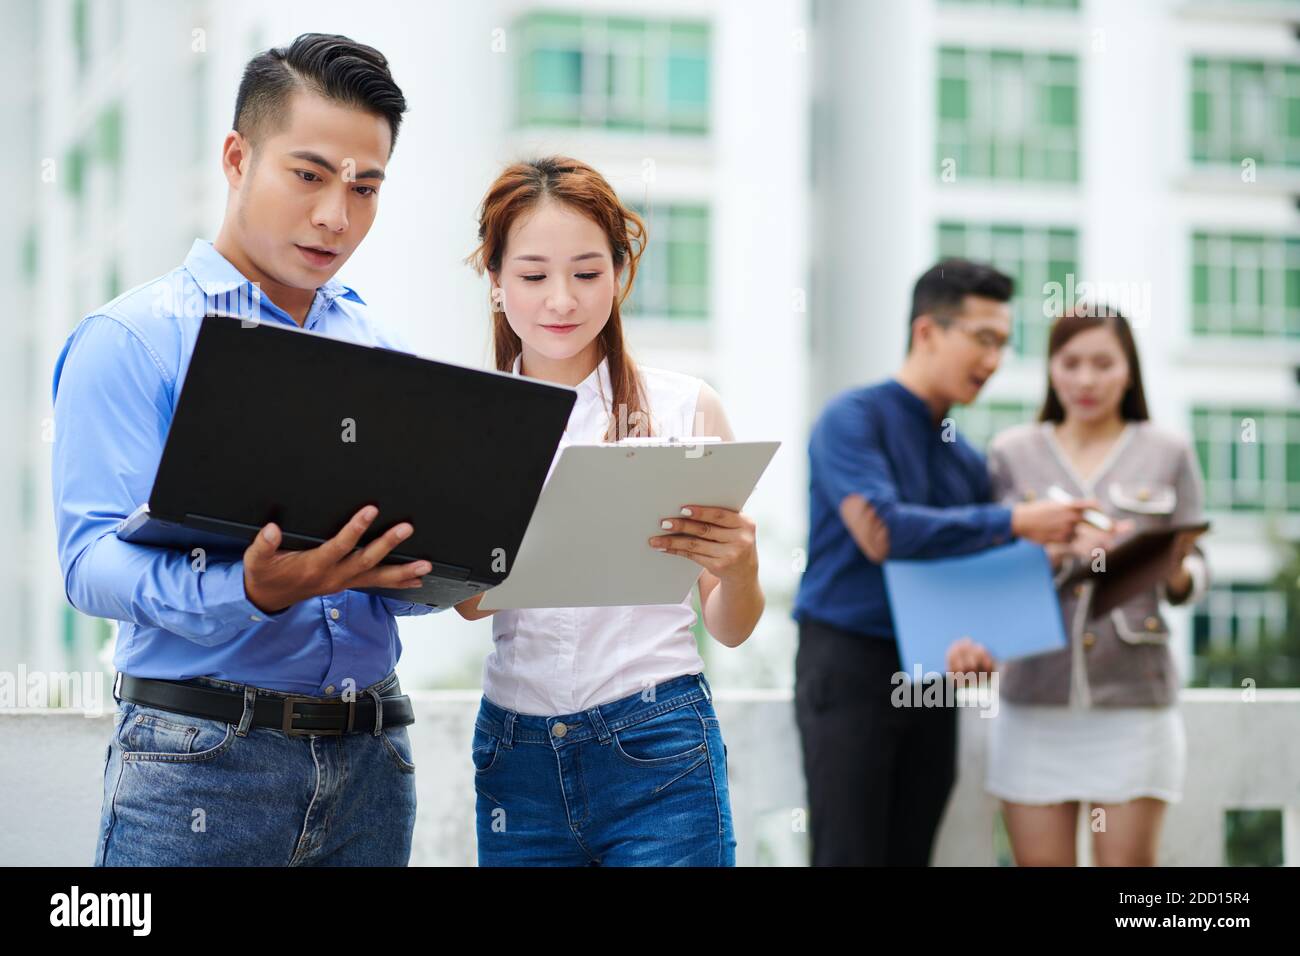 Young Vietnamese male and female software developers comparing programming code on tablet and laptop when standing outdoors Stock Photo